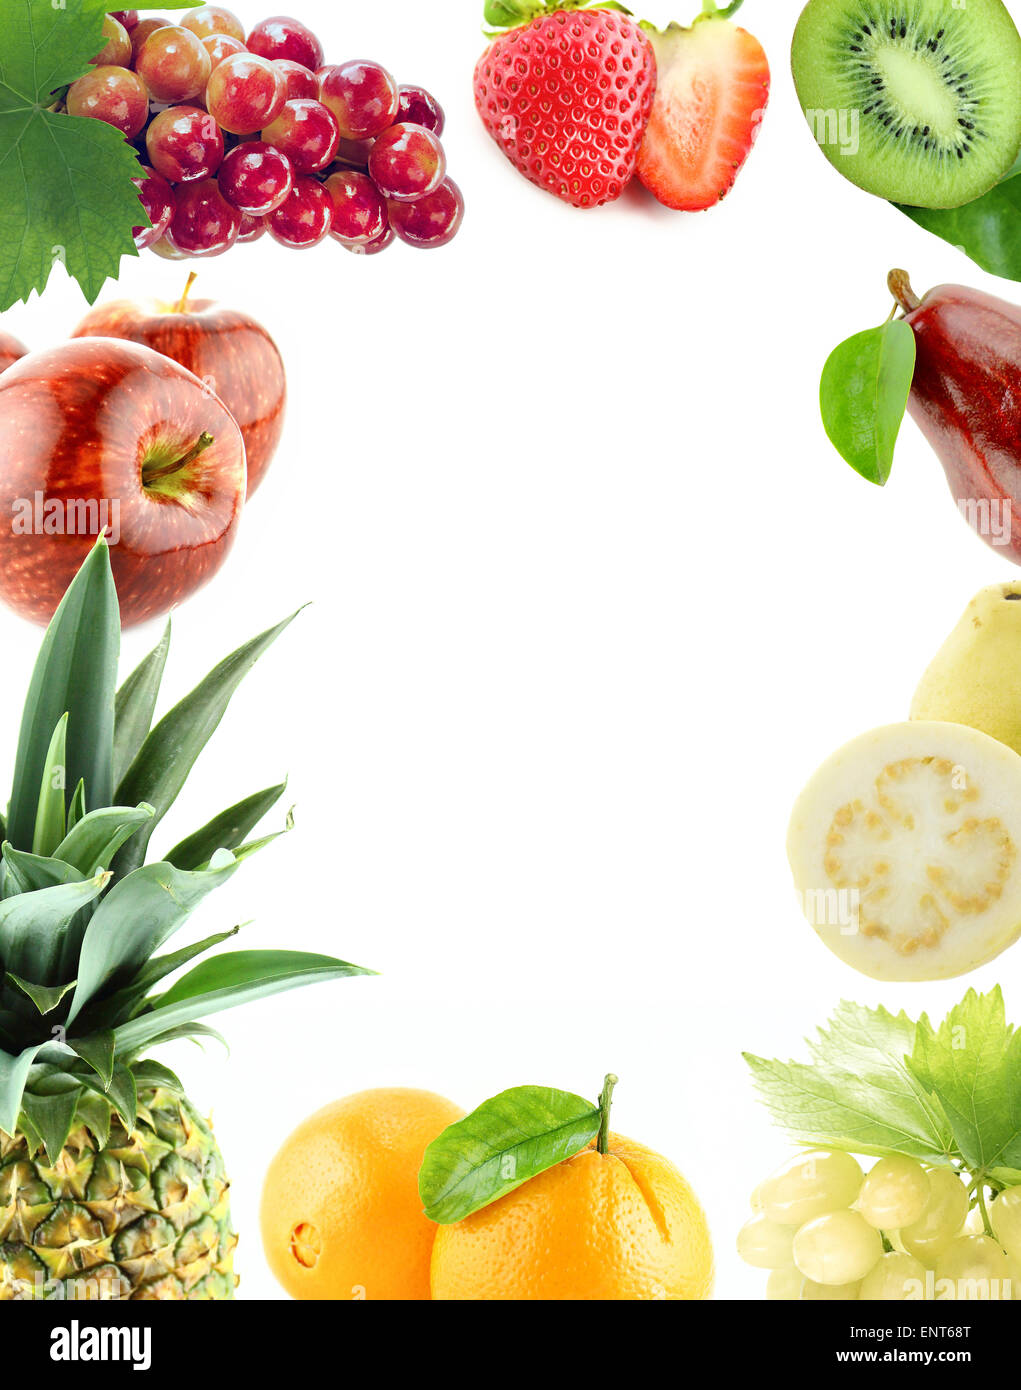 Healthy Organic Vegetables and Fruits on a white Background. Art Border Design with copy space to add text. Stock Photo